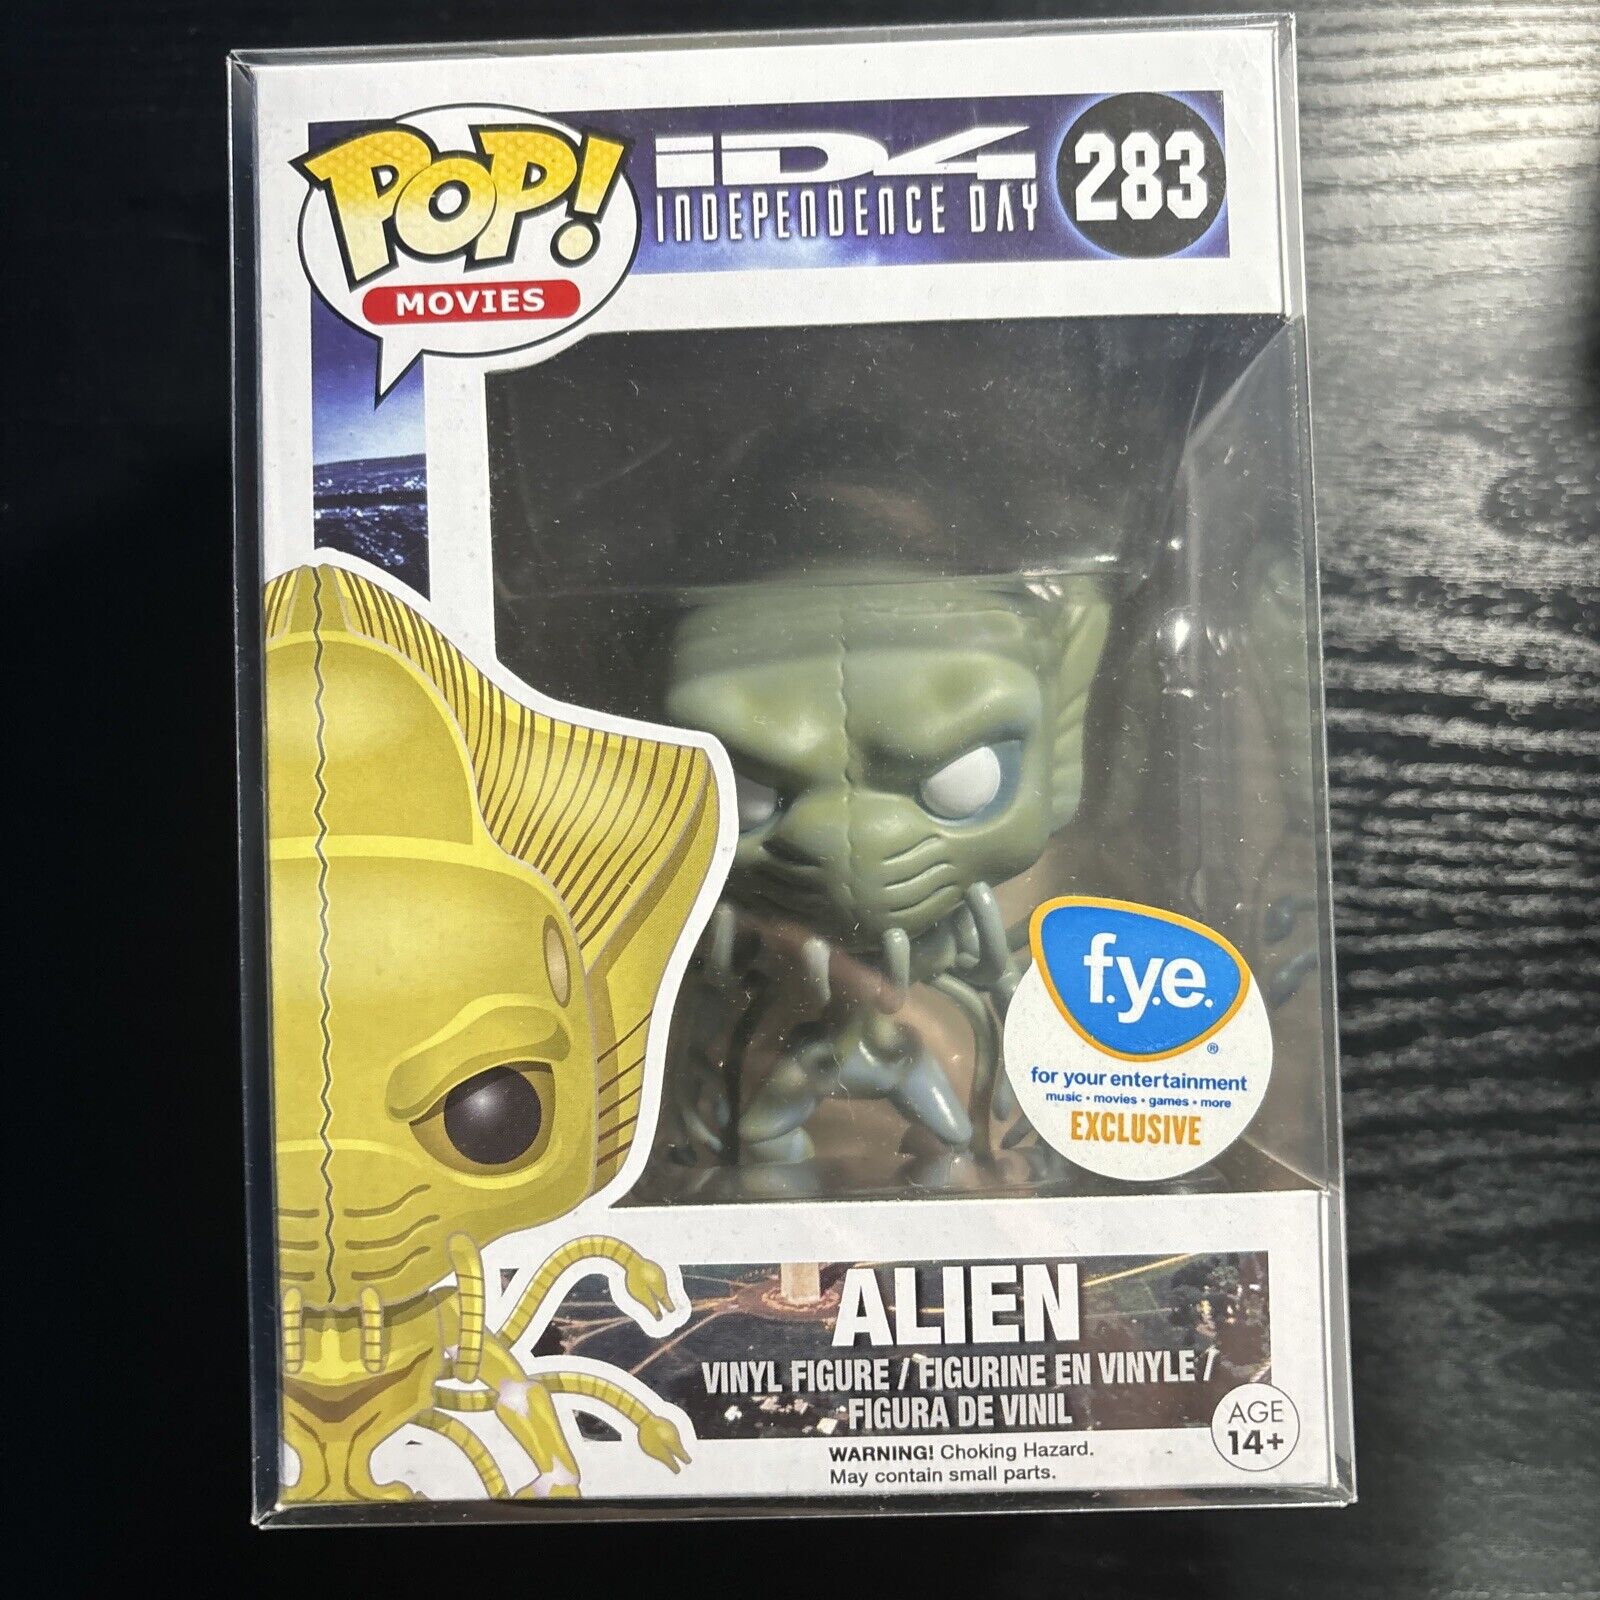 Funko Pop ID4 Independence Day Alien #283 FYE Exclusive with protector